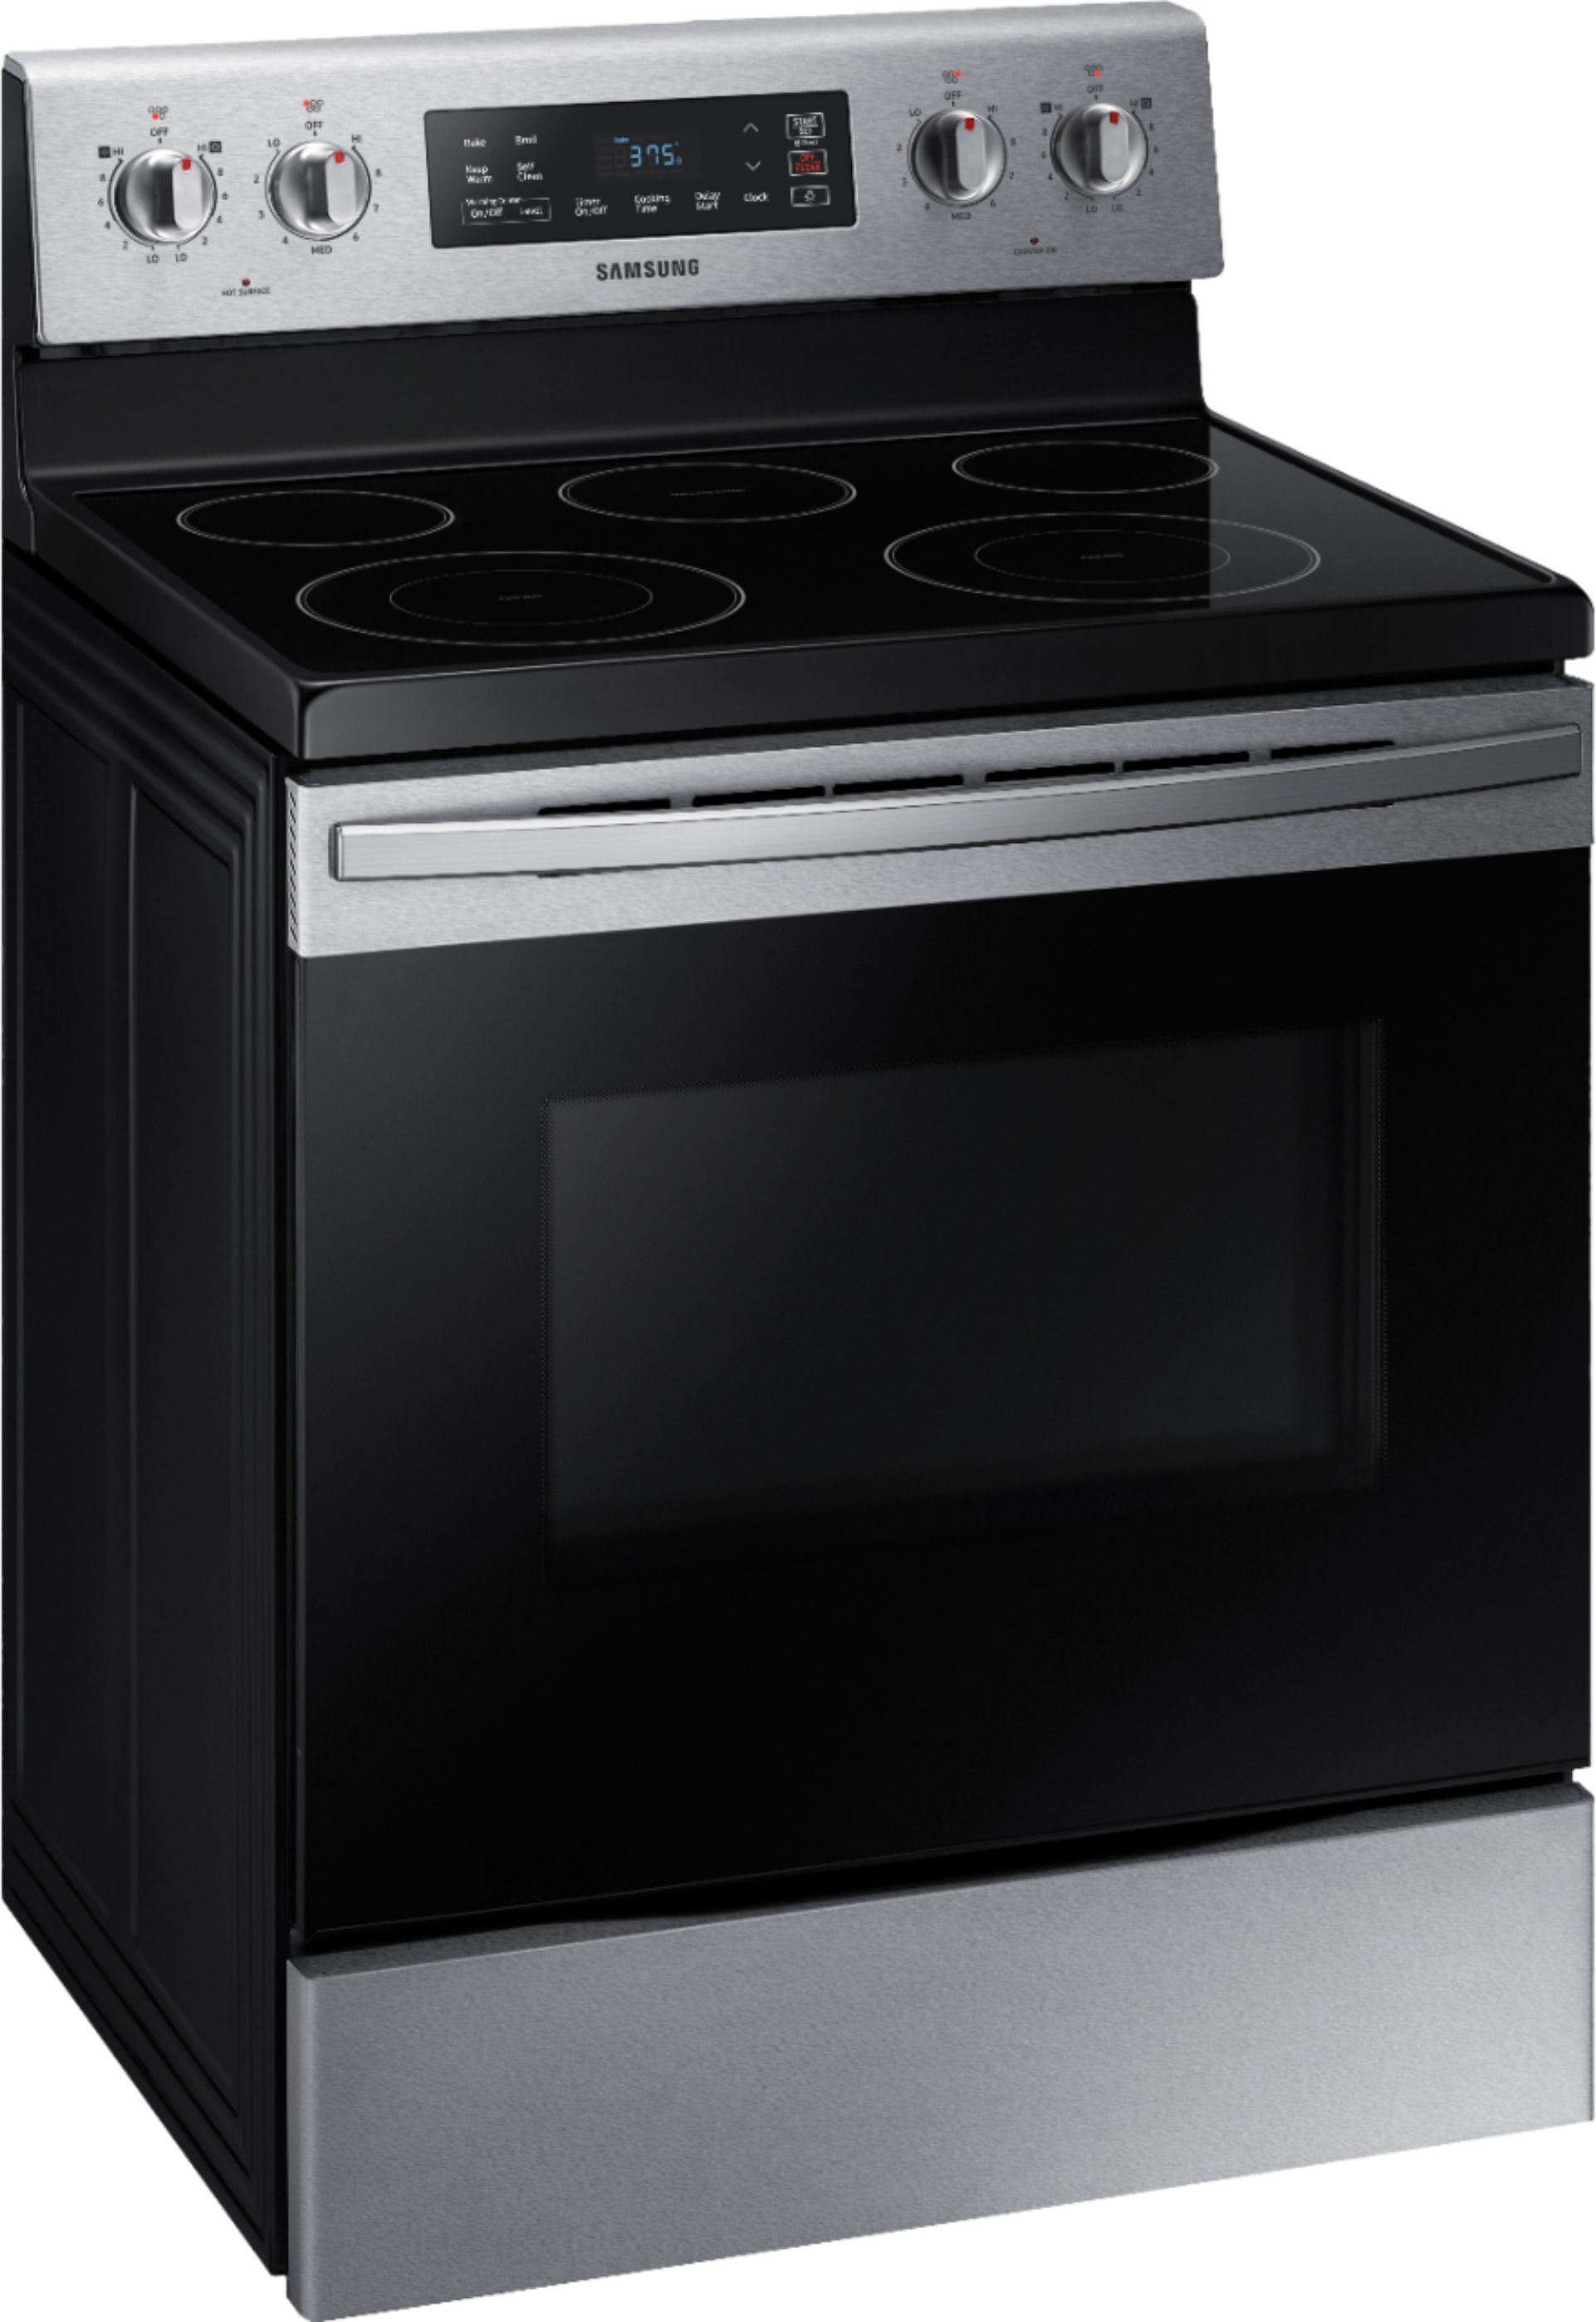 Samsung - Electric Ranges - Ranges - The Home Depot